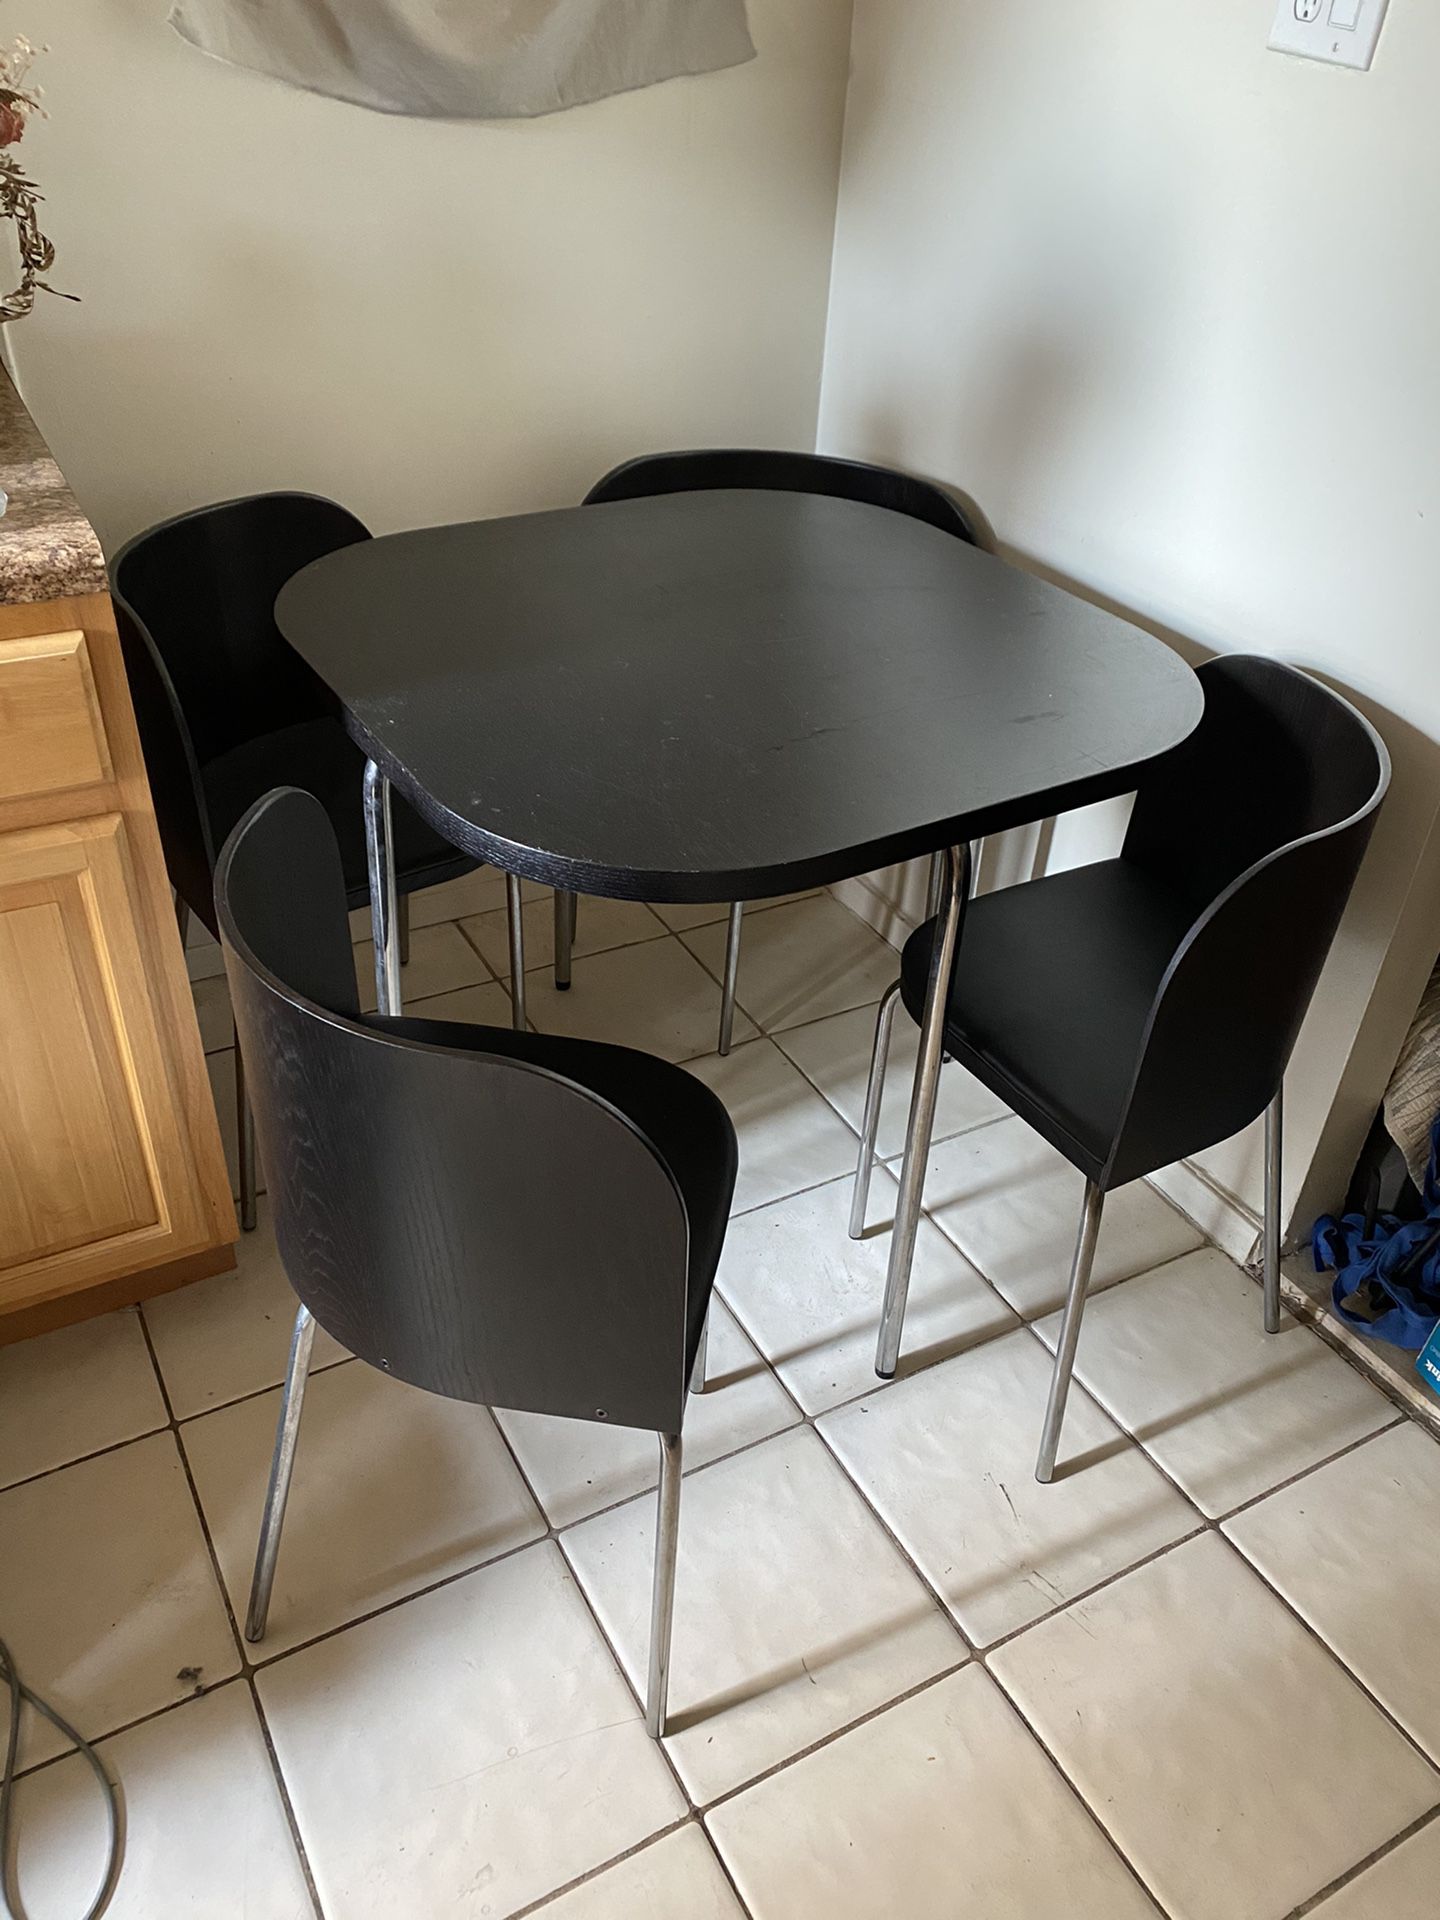 Ikea Table with 4 chairs